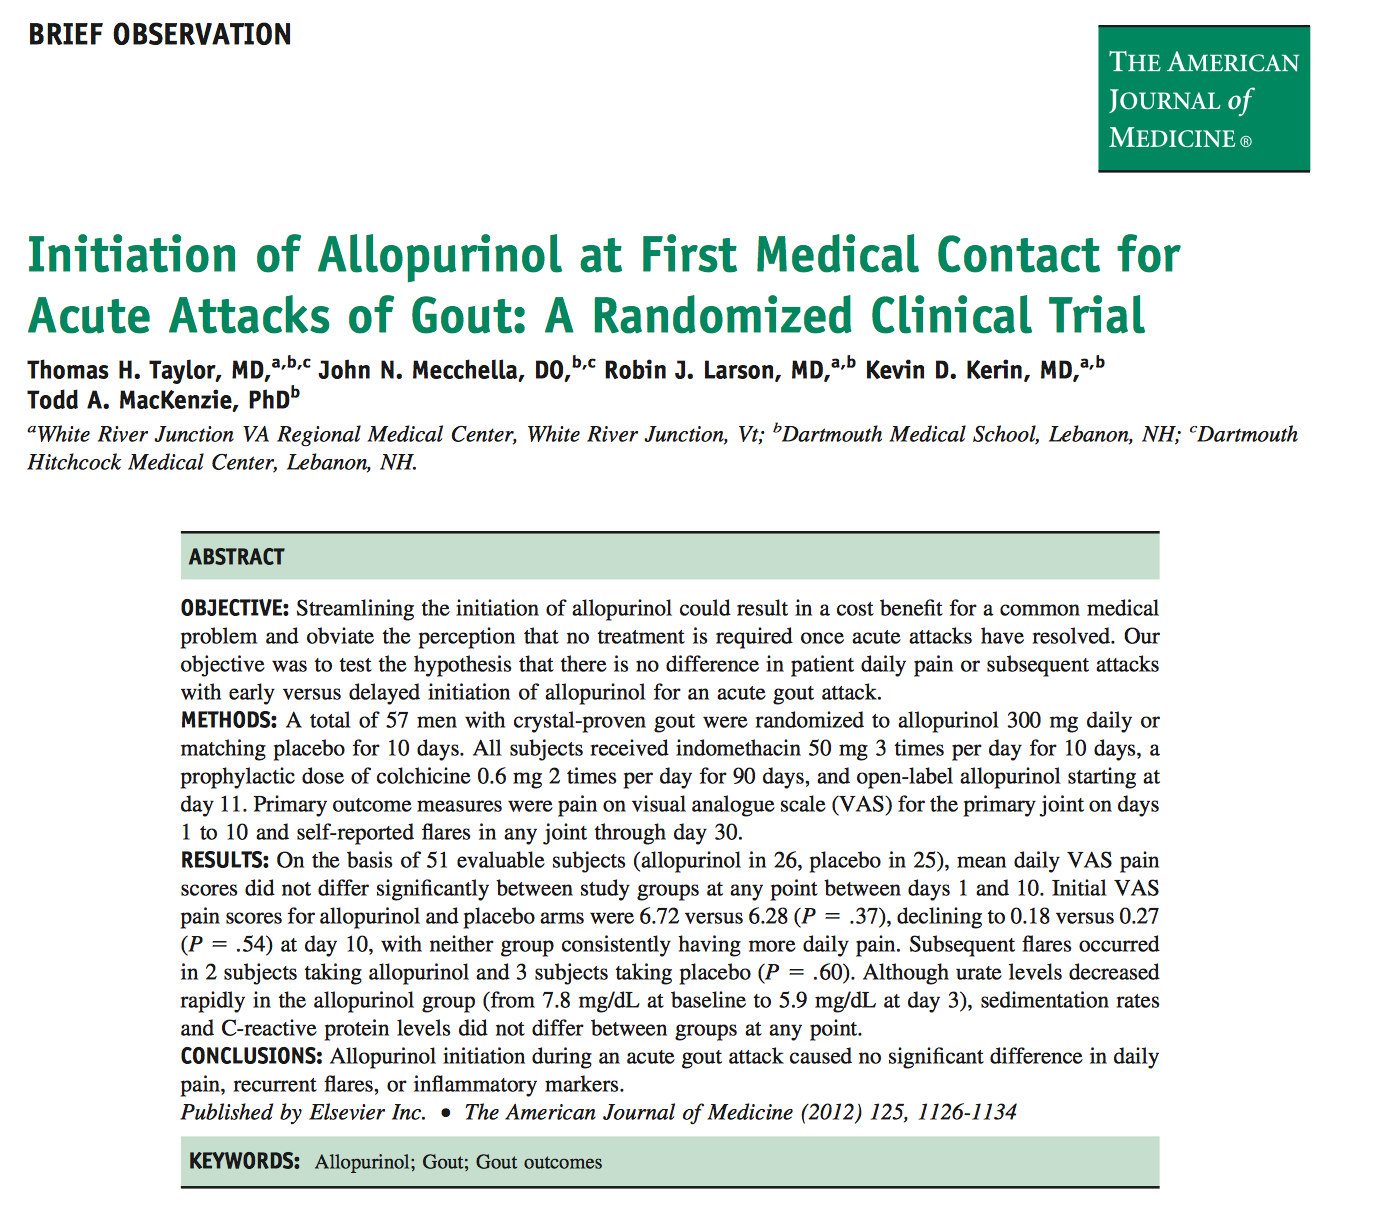 E5: Allopurinol at 1st Medical Contact for Acute Gout - An RCT